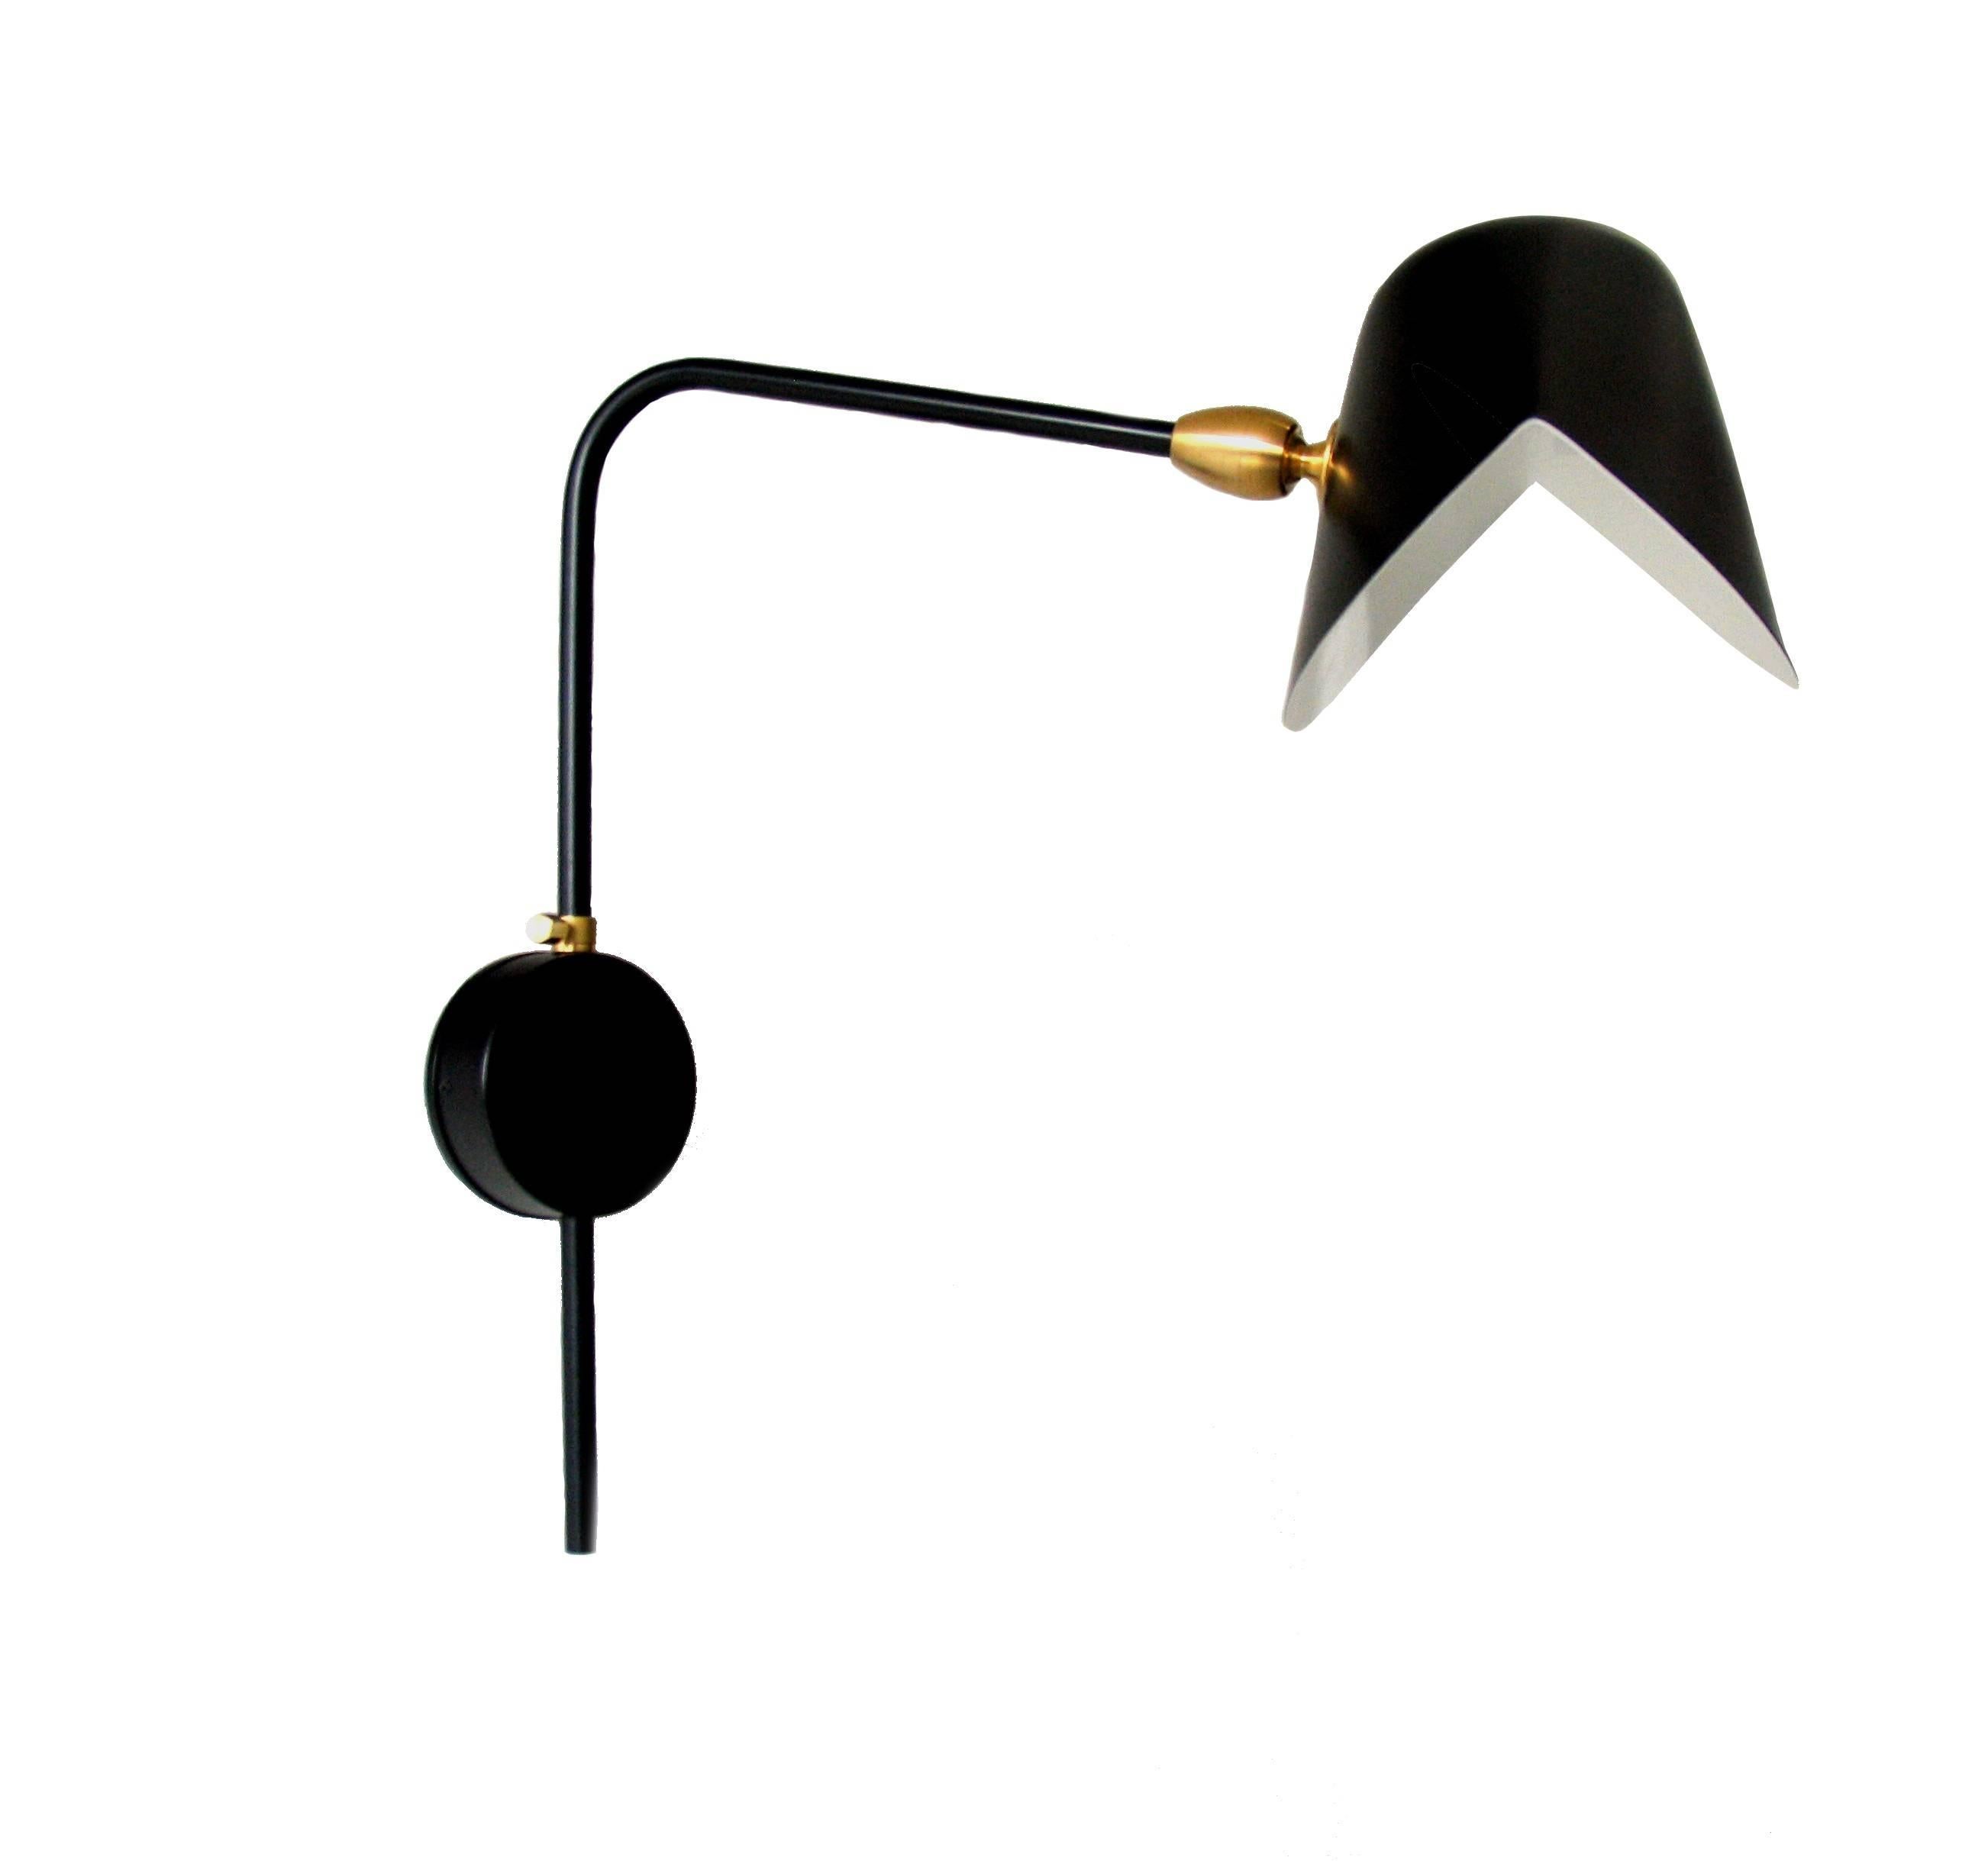 This sconce incorporates the 